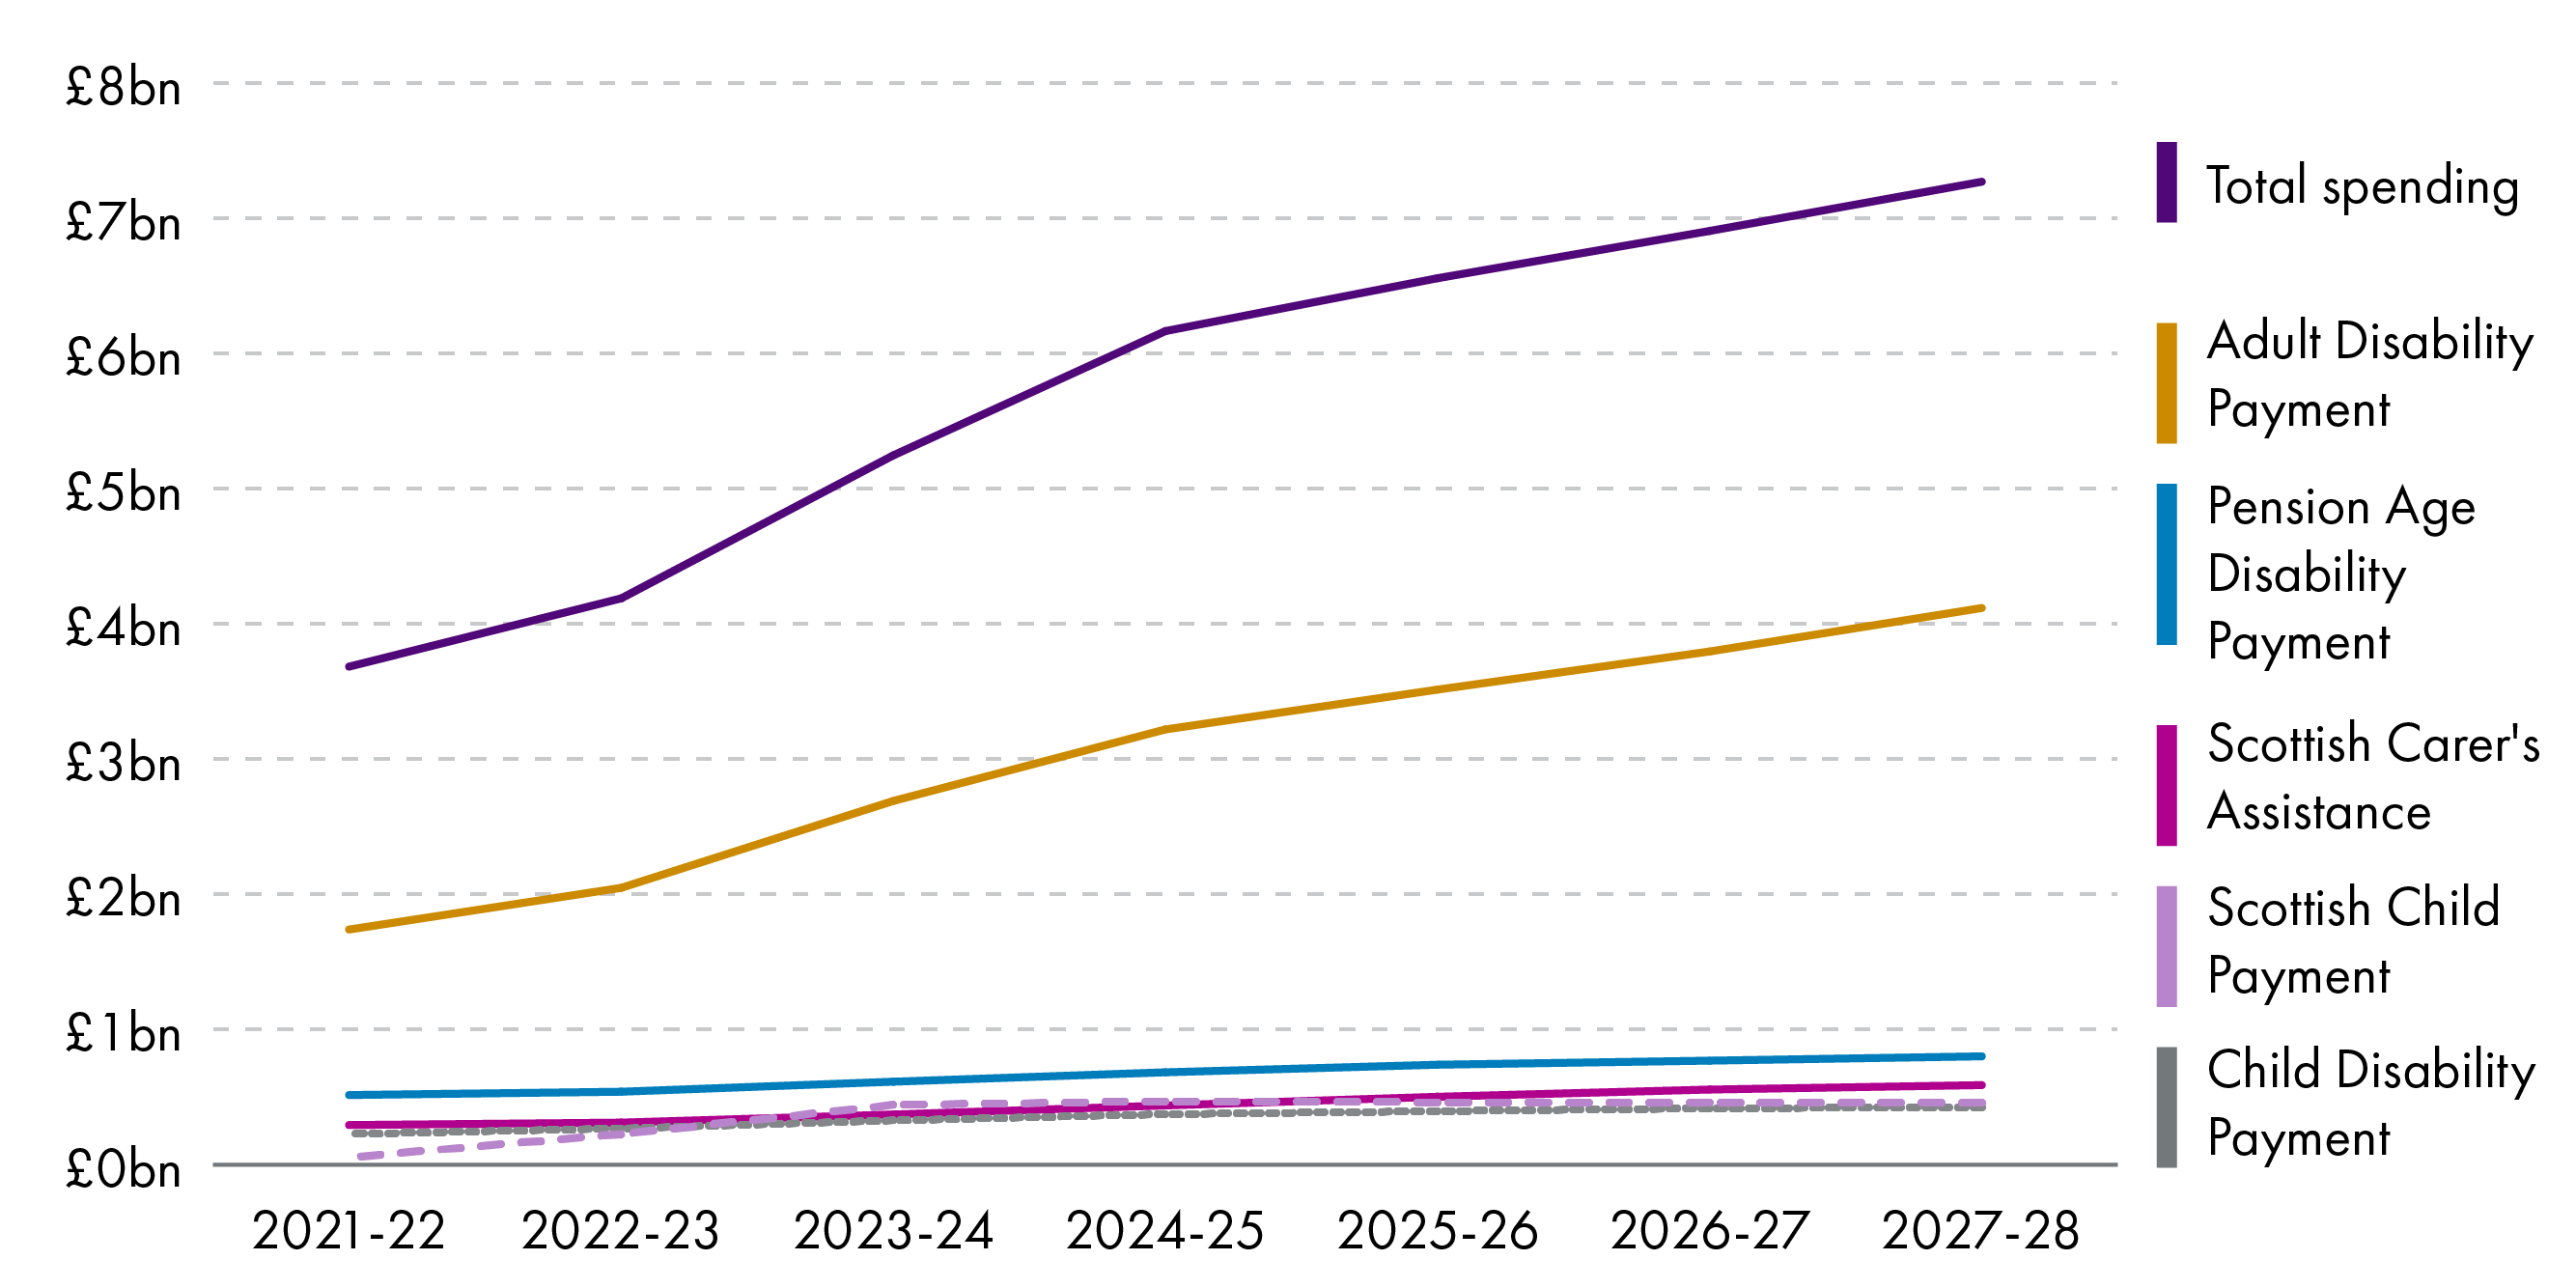 A line chart showing the forecasts for the Social Security Scotland benefits up to financial year 2027-28.